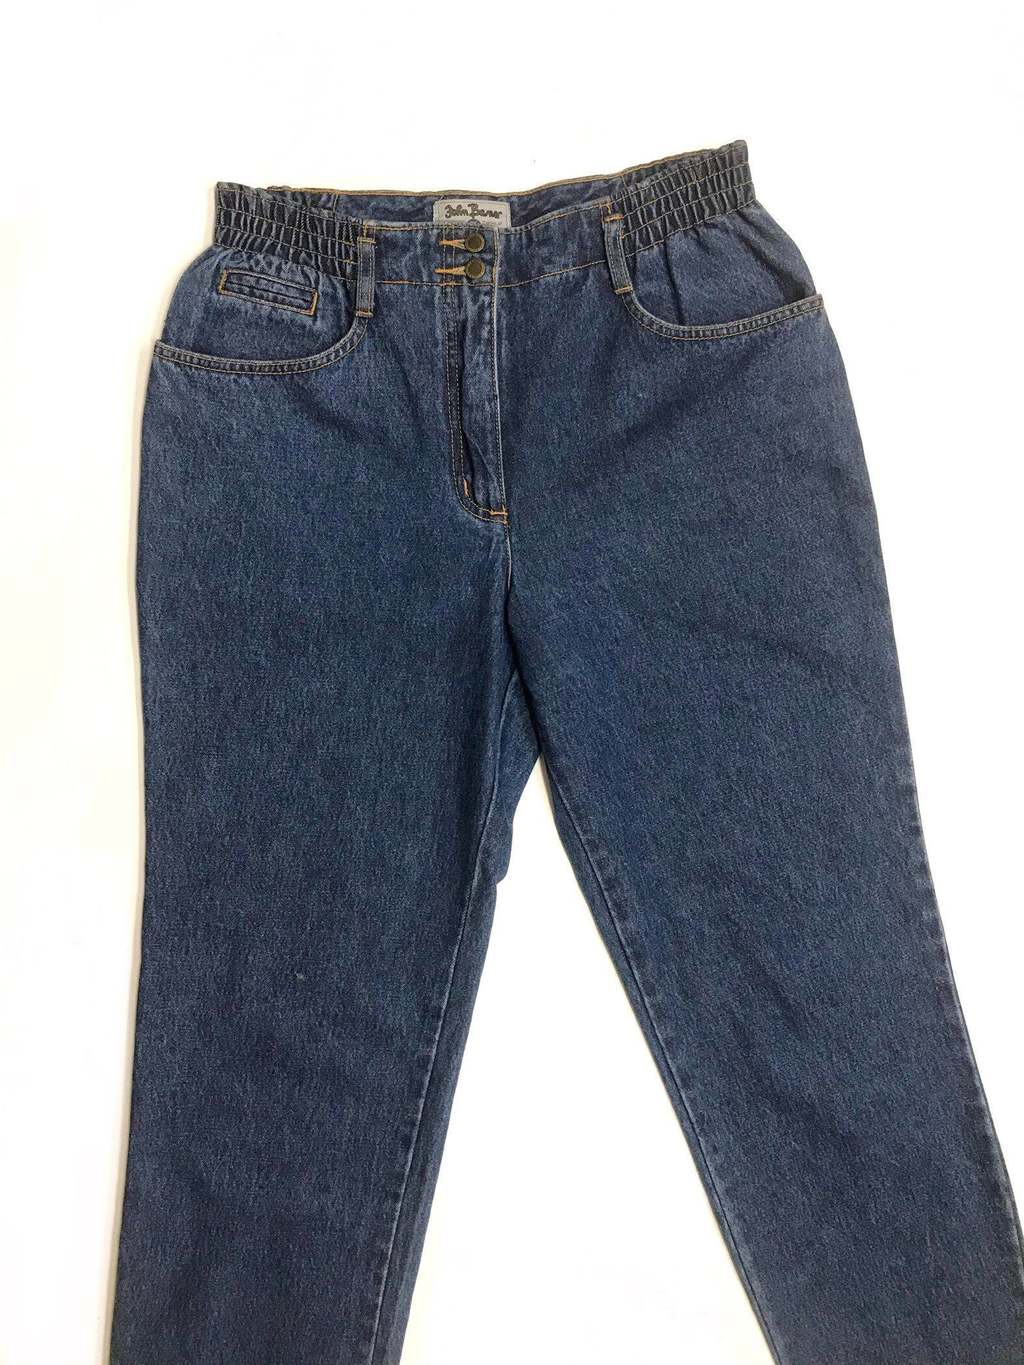 Vintage high waist mom jeans with double-button waist, mid blue - W32 x ...